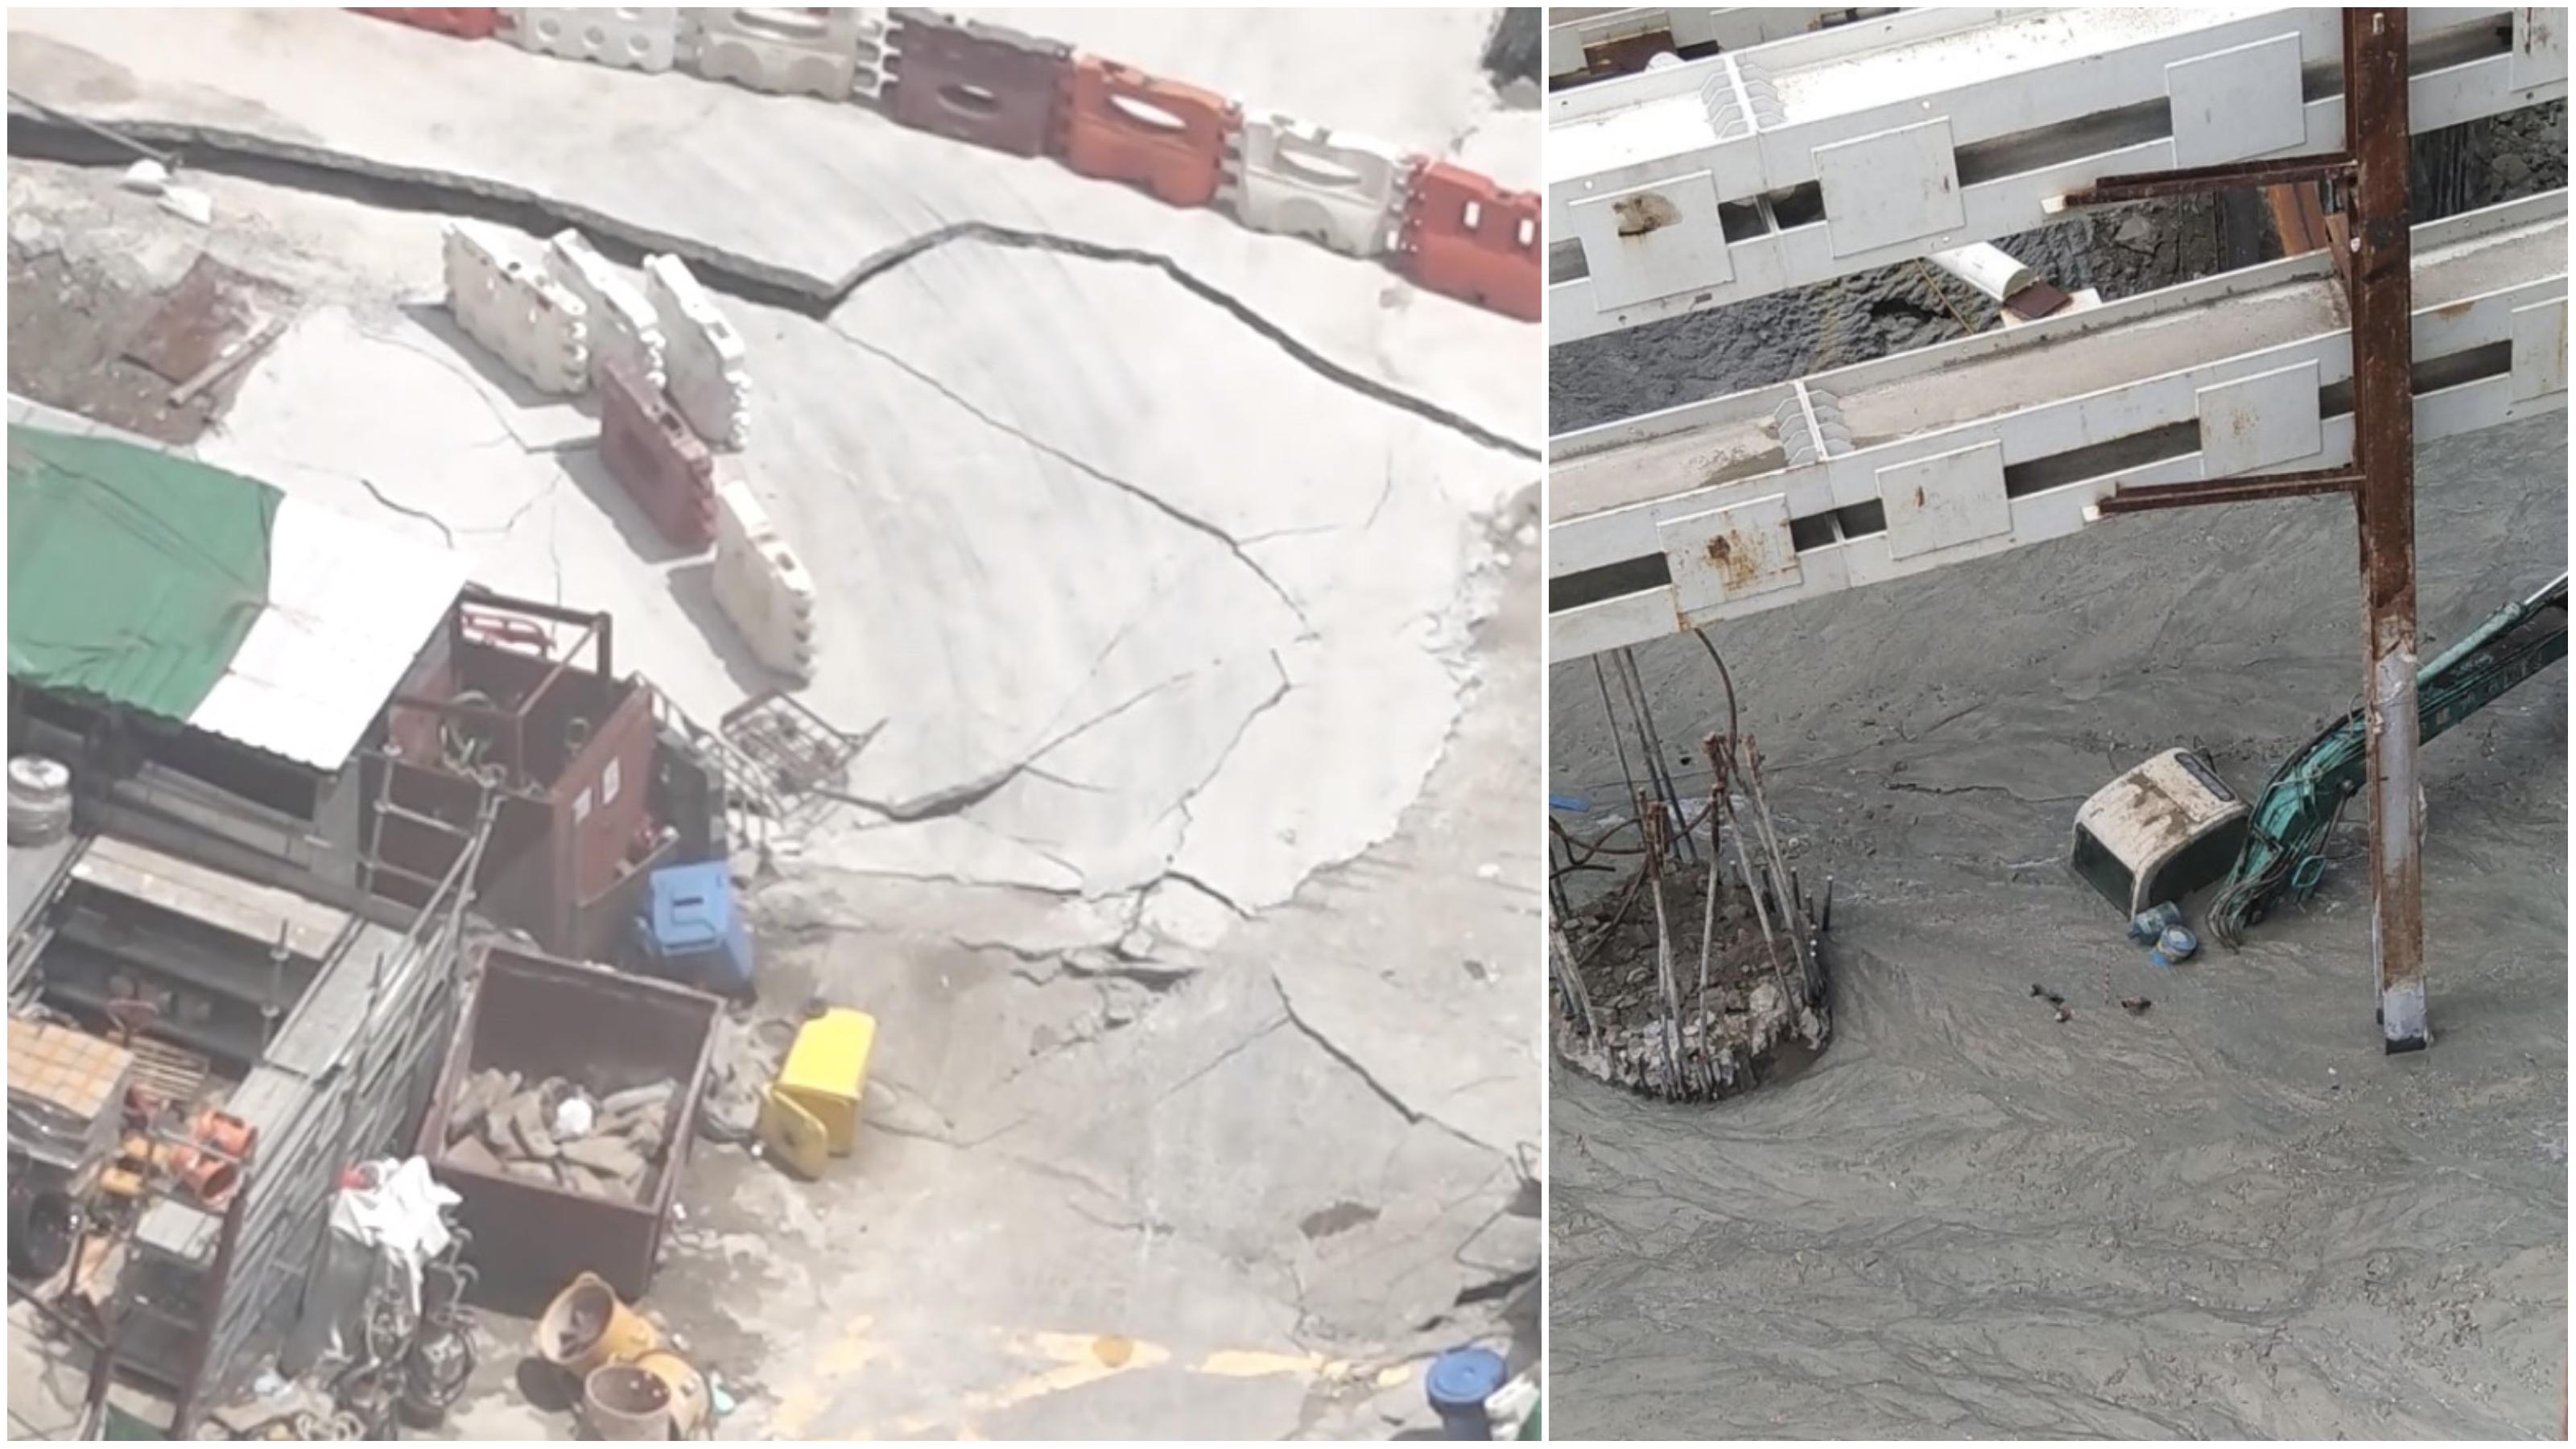 Images from the West Kowloon Cultural District construction site show huge cracks in the pavement (left) and what appears to be a backhoe submerged in wet cement (right). Photos via LIHKG/RTHK video.